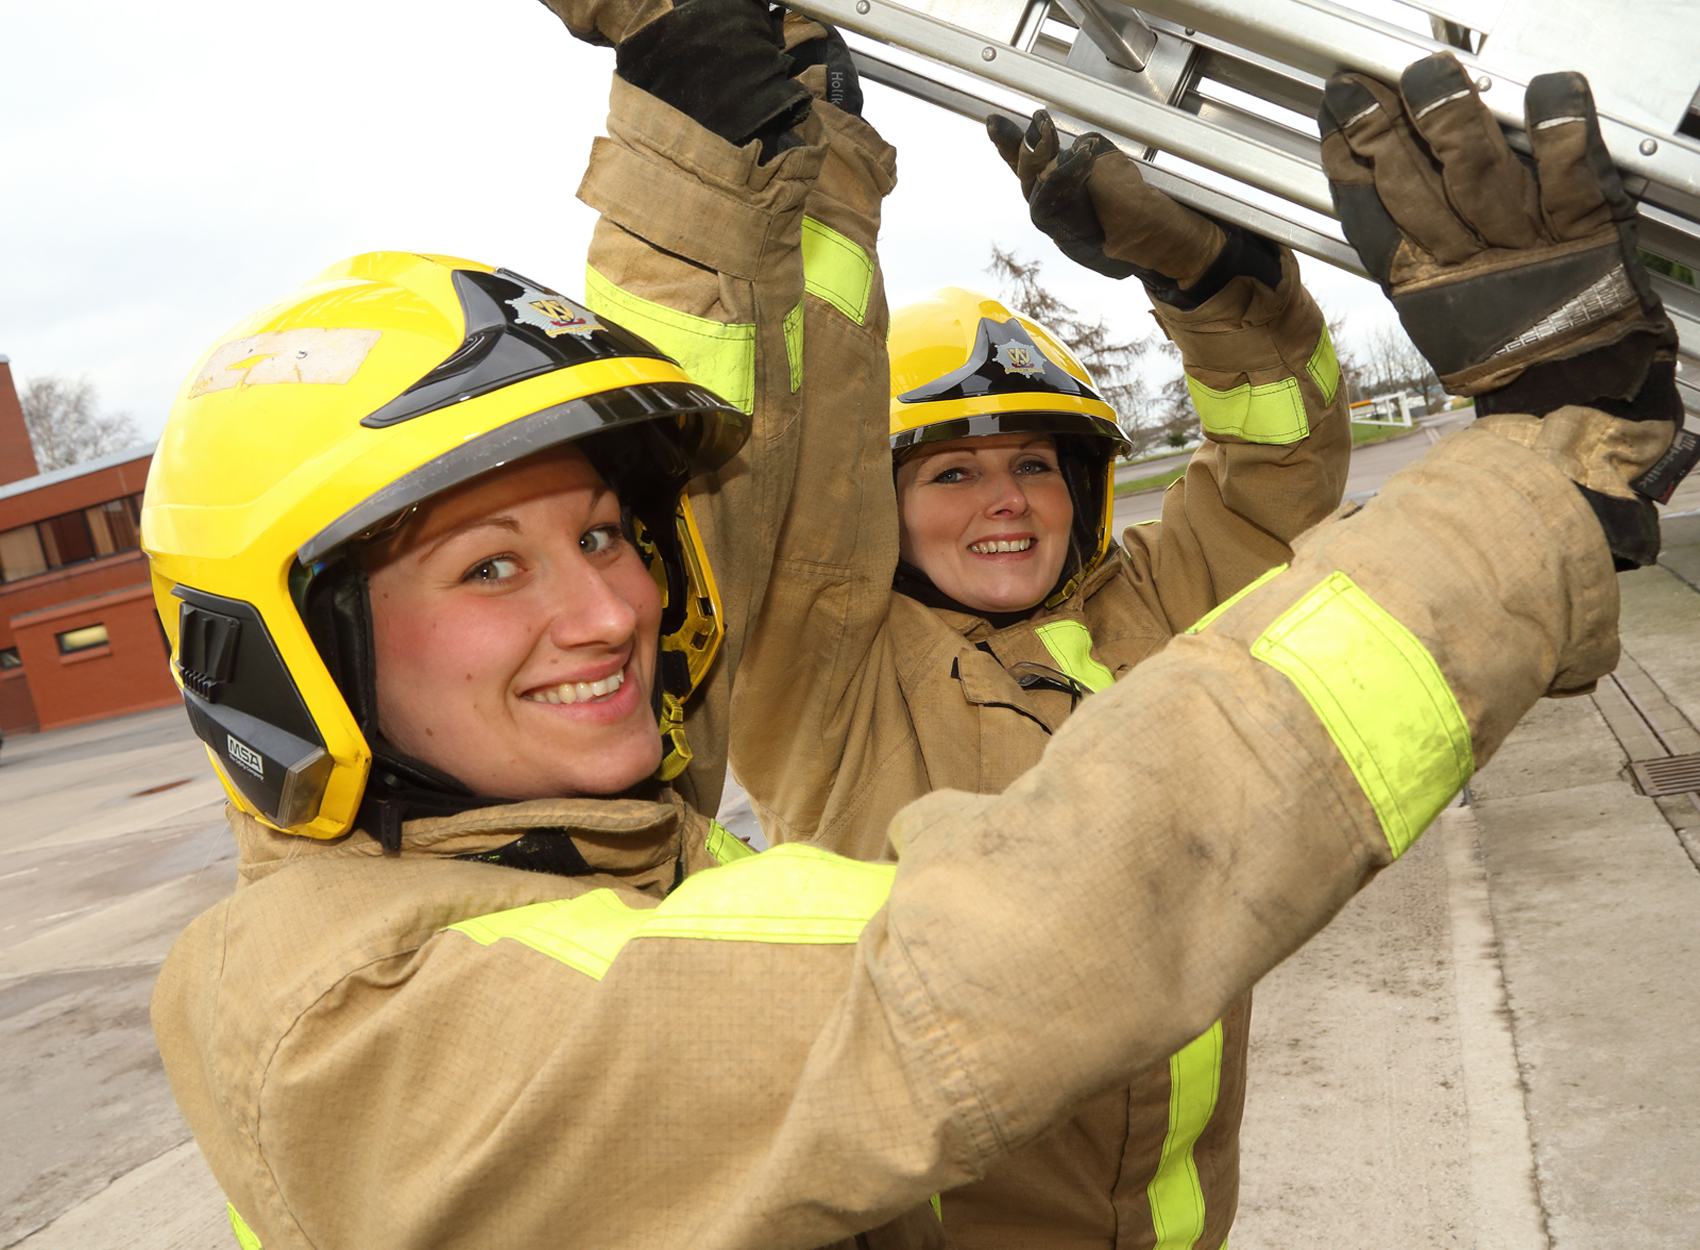 Kat Frost and Michelle Townsend in ladder training as they become the latest women firefighter recruits at Shropshire Fire and Rescue Service